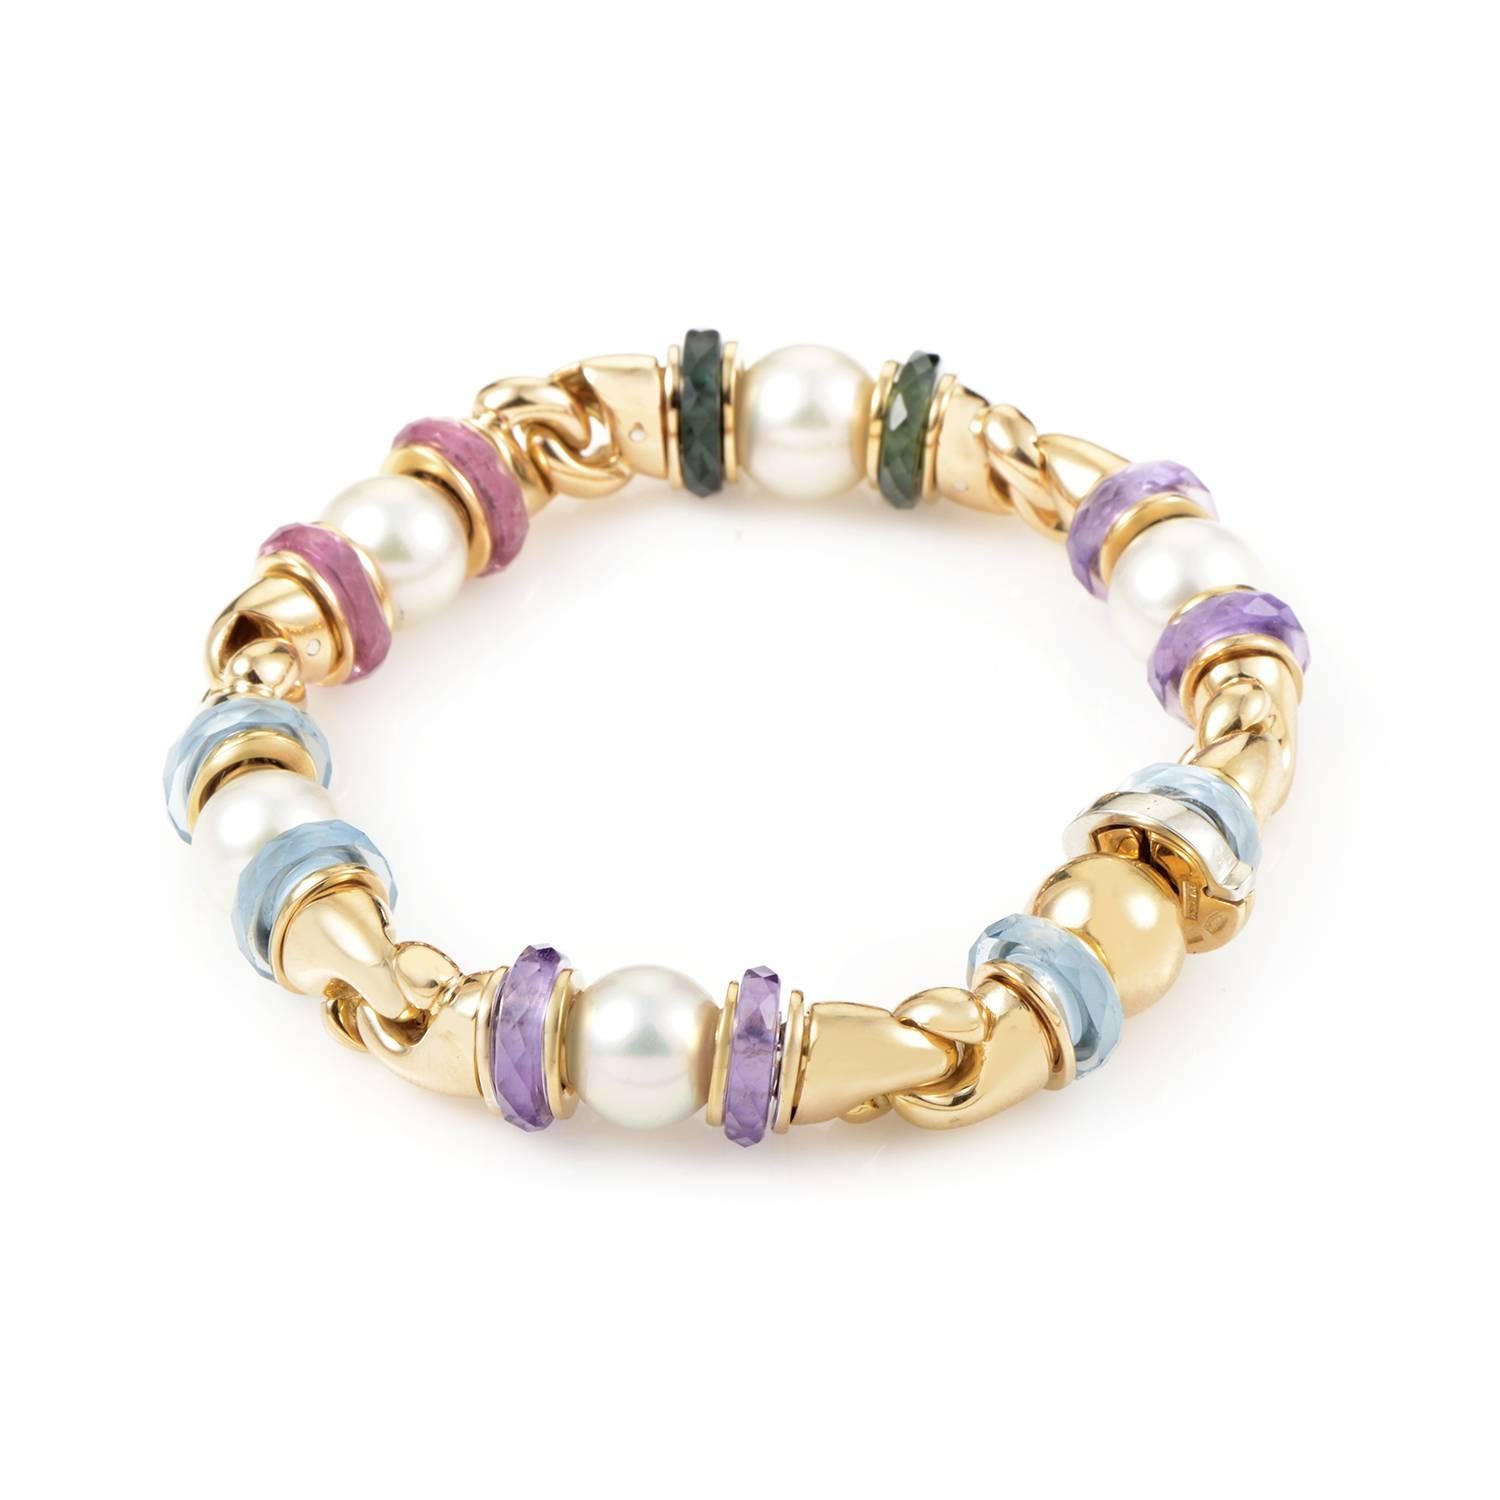 With the pleasant colors of various gems bringing out the angelic beauty of pearls in its full bright glow, this exceptional bracelet from Bulgari is made of luxurious 18K yellow gold, offering a lively and tasteful appeal.
Included Items: